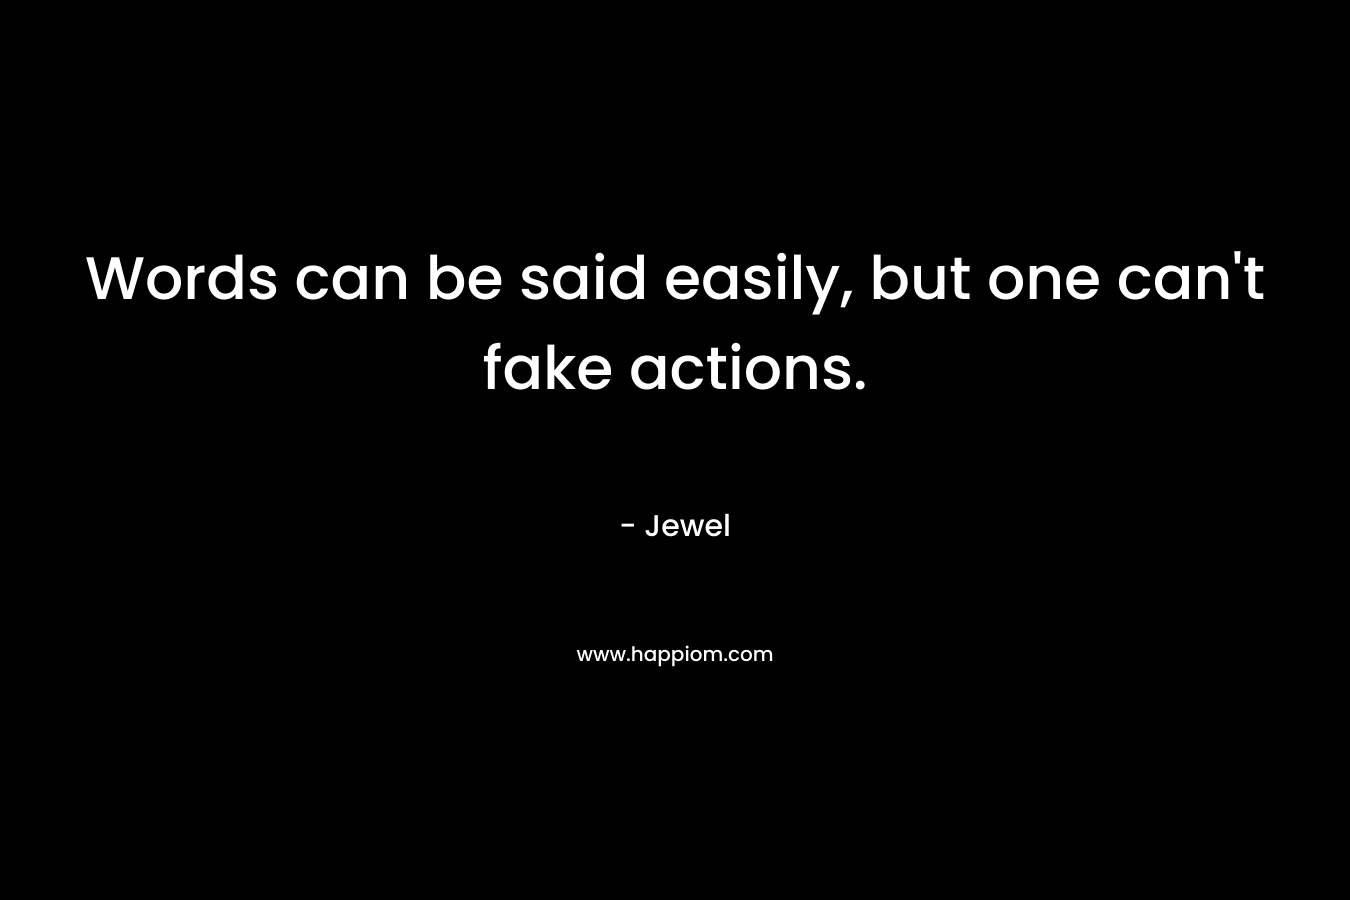 Words can be said easily, but one can’t fake actions. – Jewel